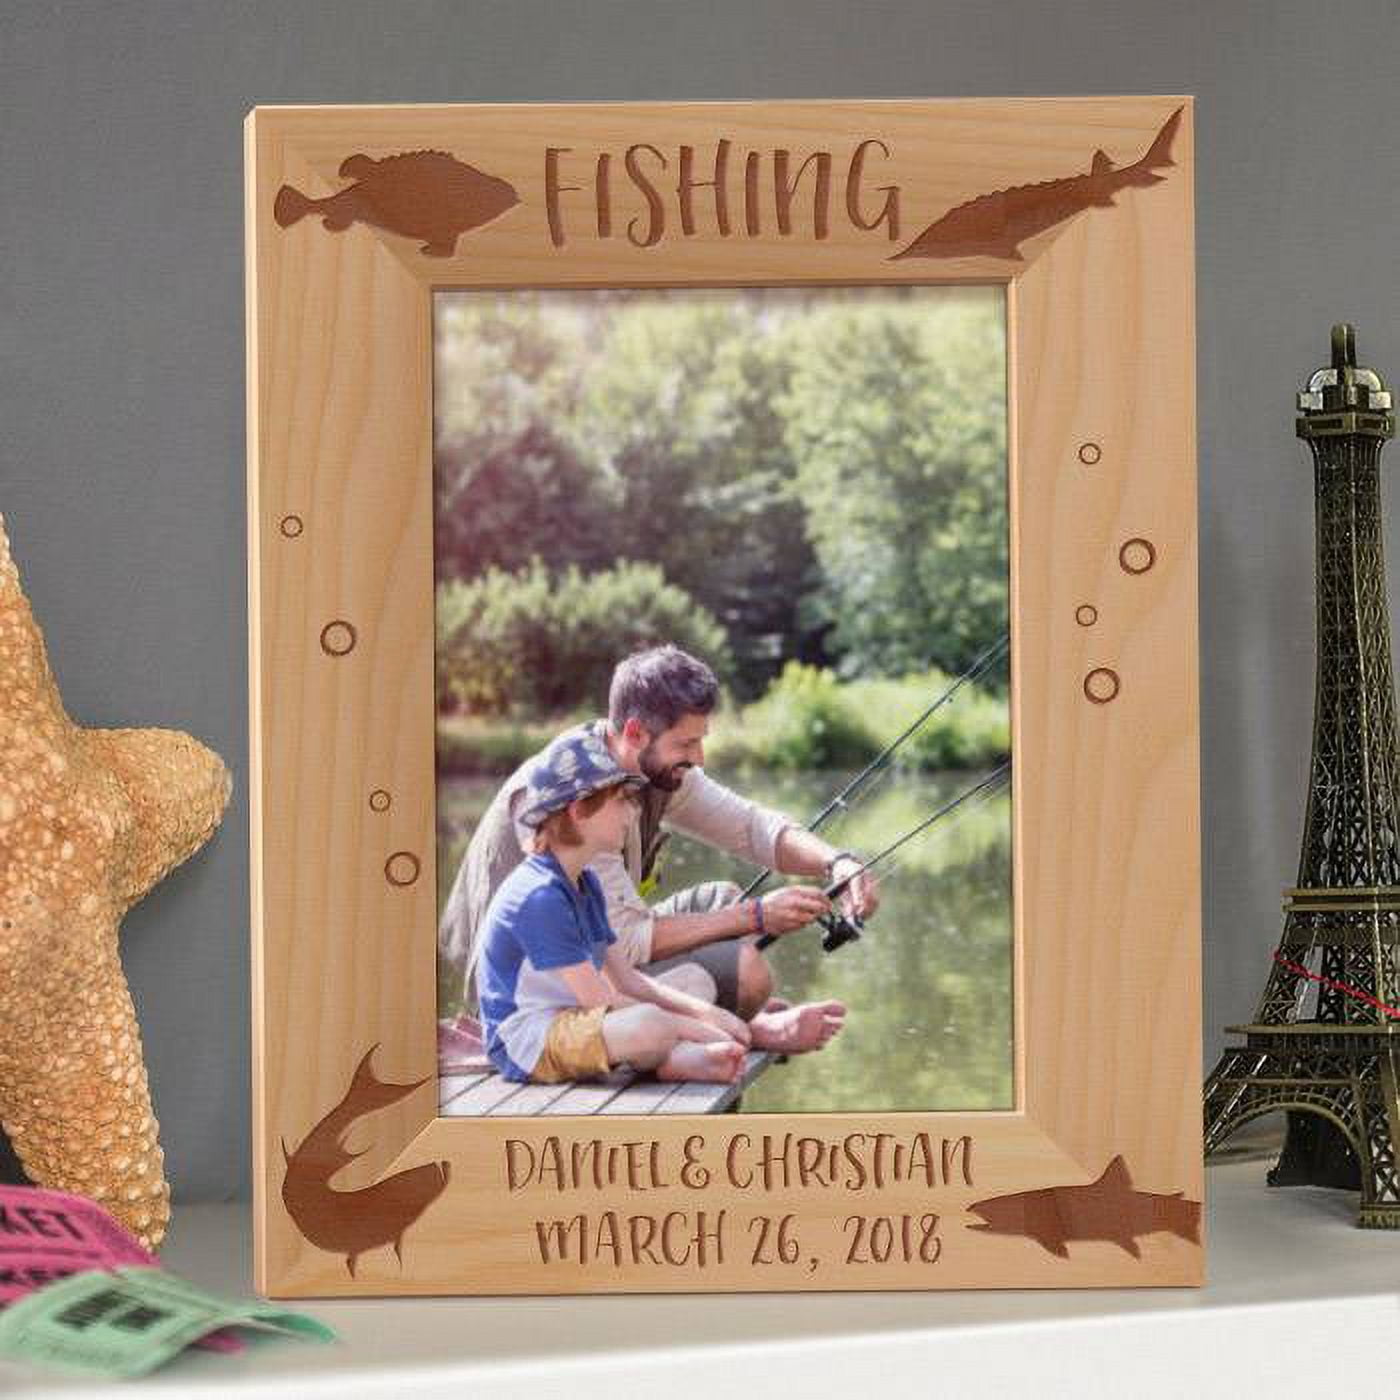 Fishing Personalized Wooden Picture Frame 8 x 10 Brown (Vertical)